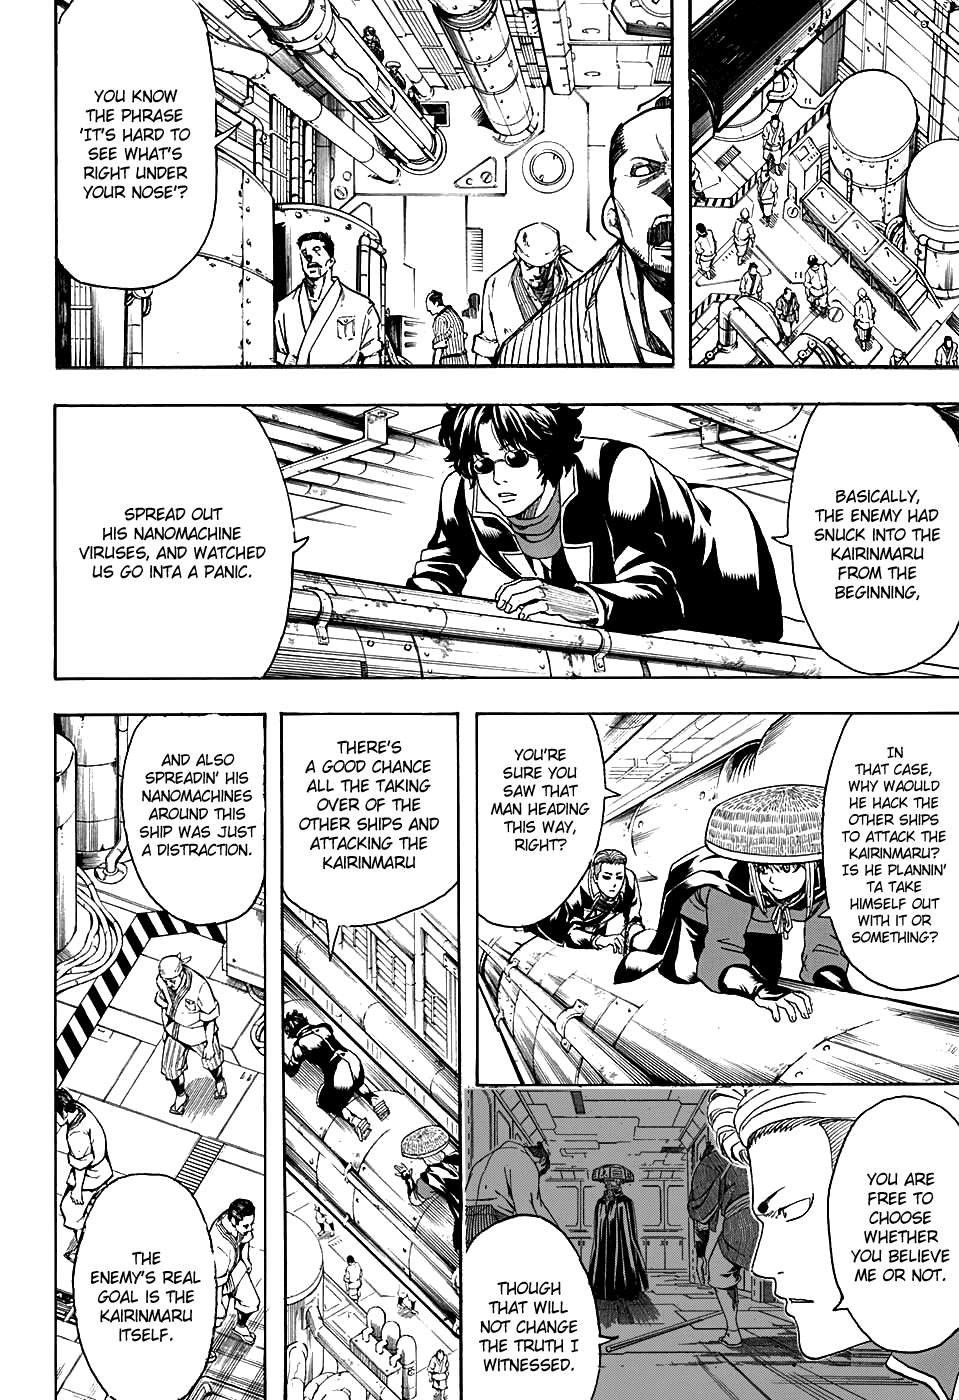 Gintama chapter 566 page 7